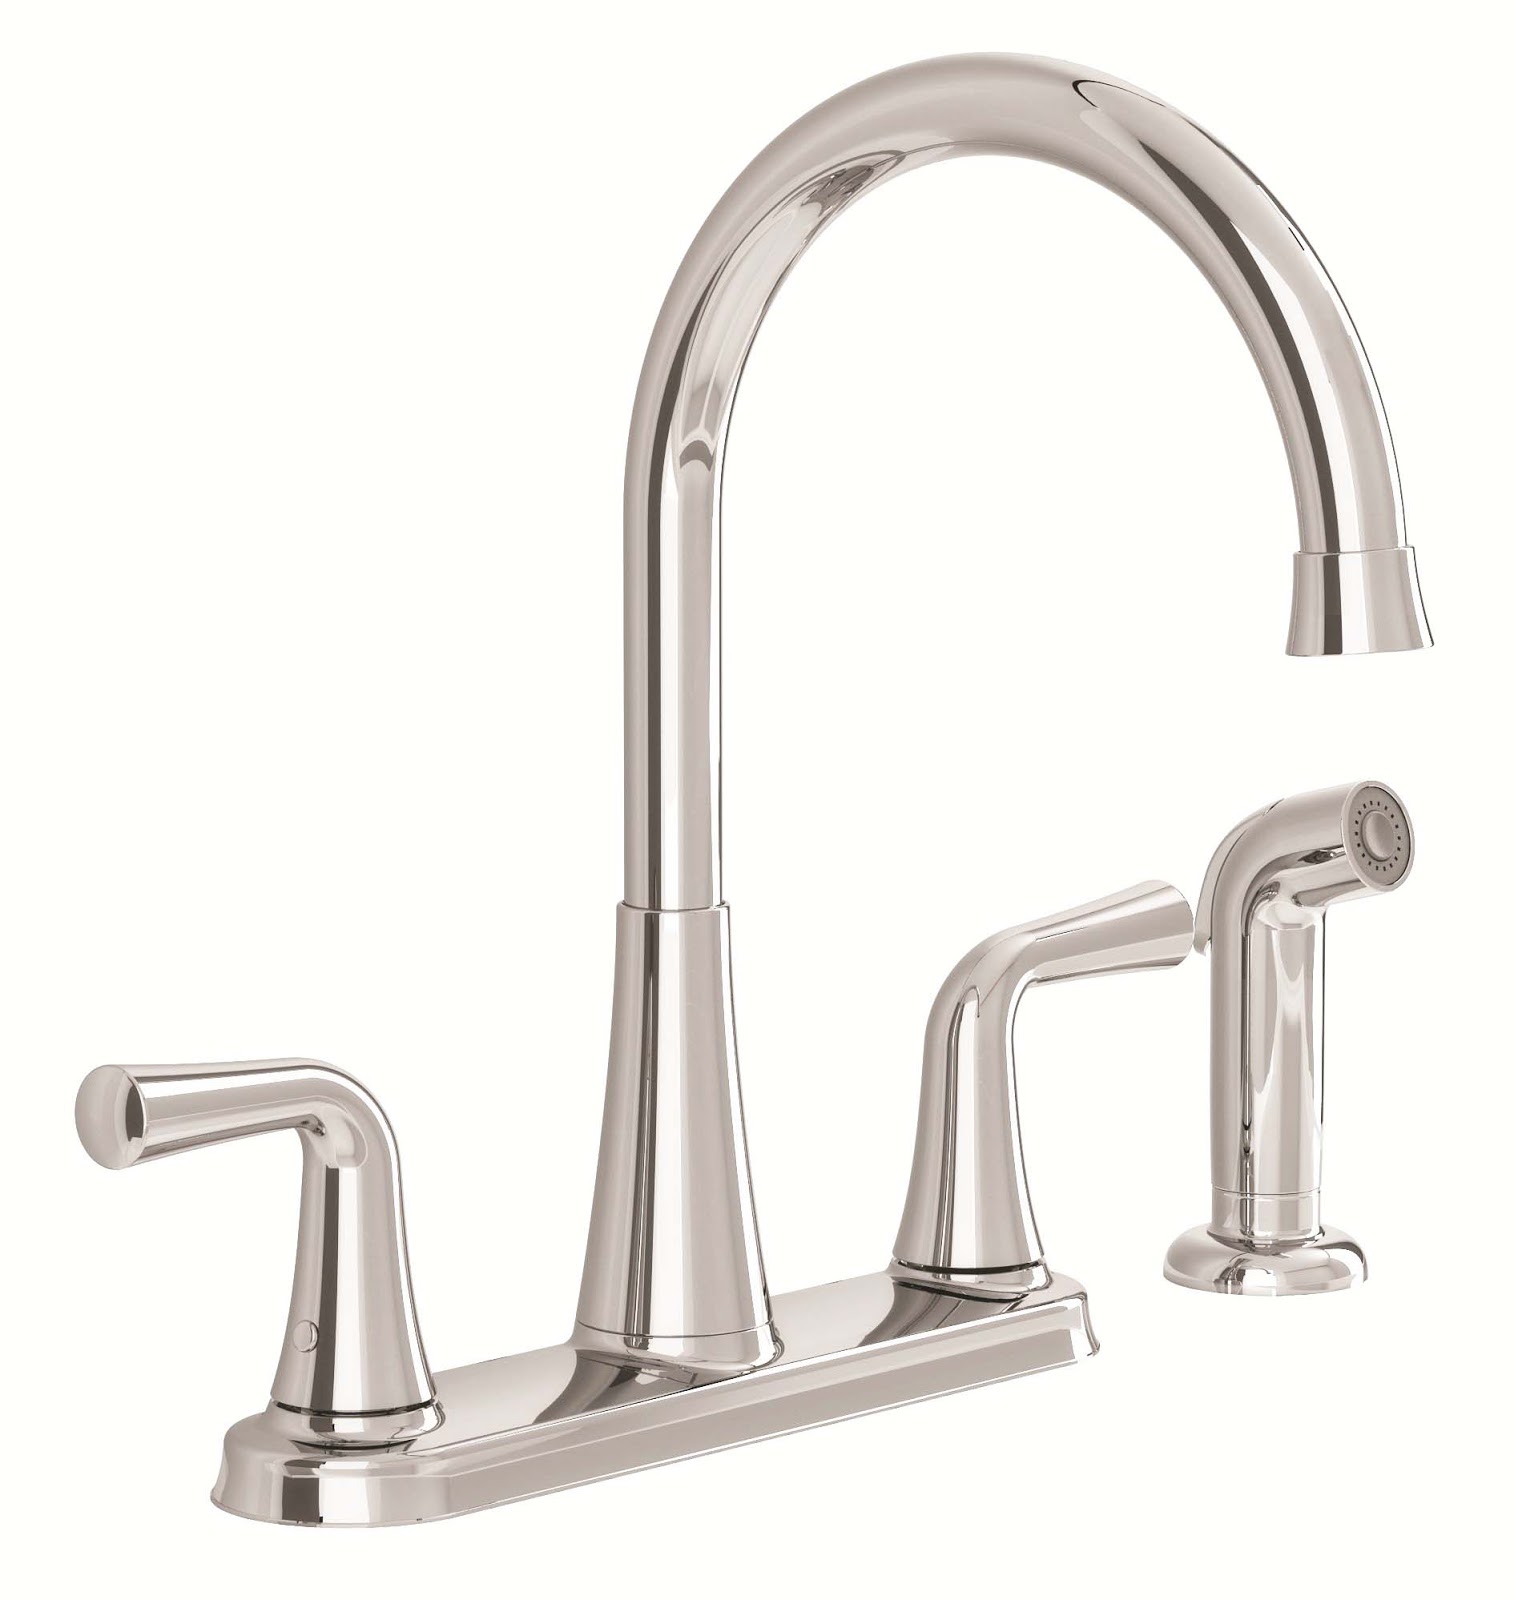 How to Disassemble a Faucet - HomeTips